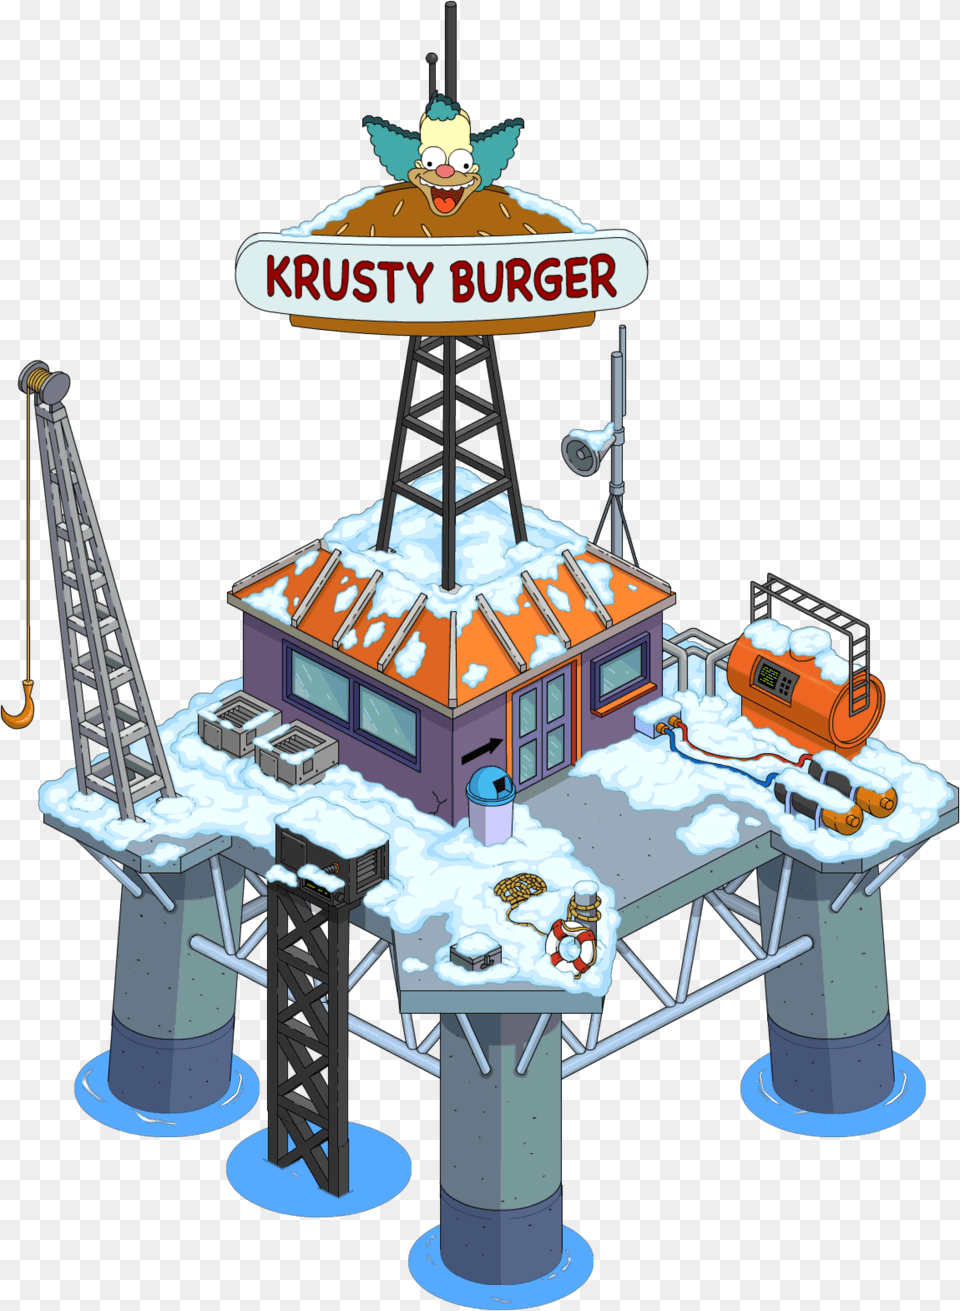 Clip Art Krusty Burger Rig The Krusty Burger Rig, Construction, Outdoors, Oilfield Free Transparent Png